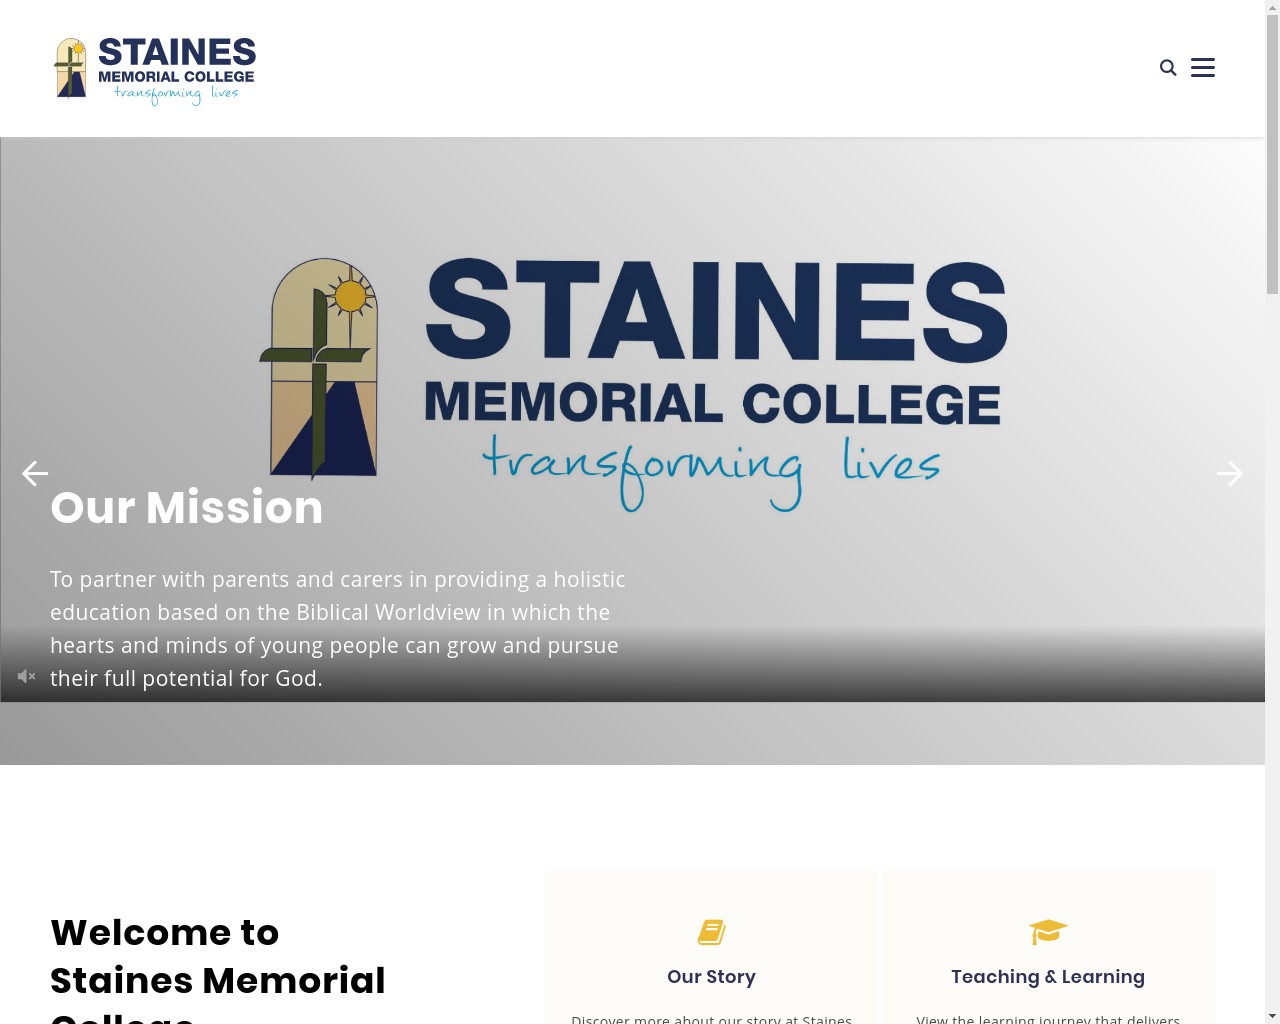 Staines Memorial College